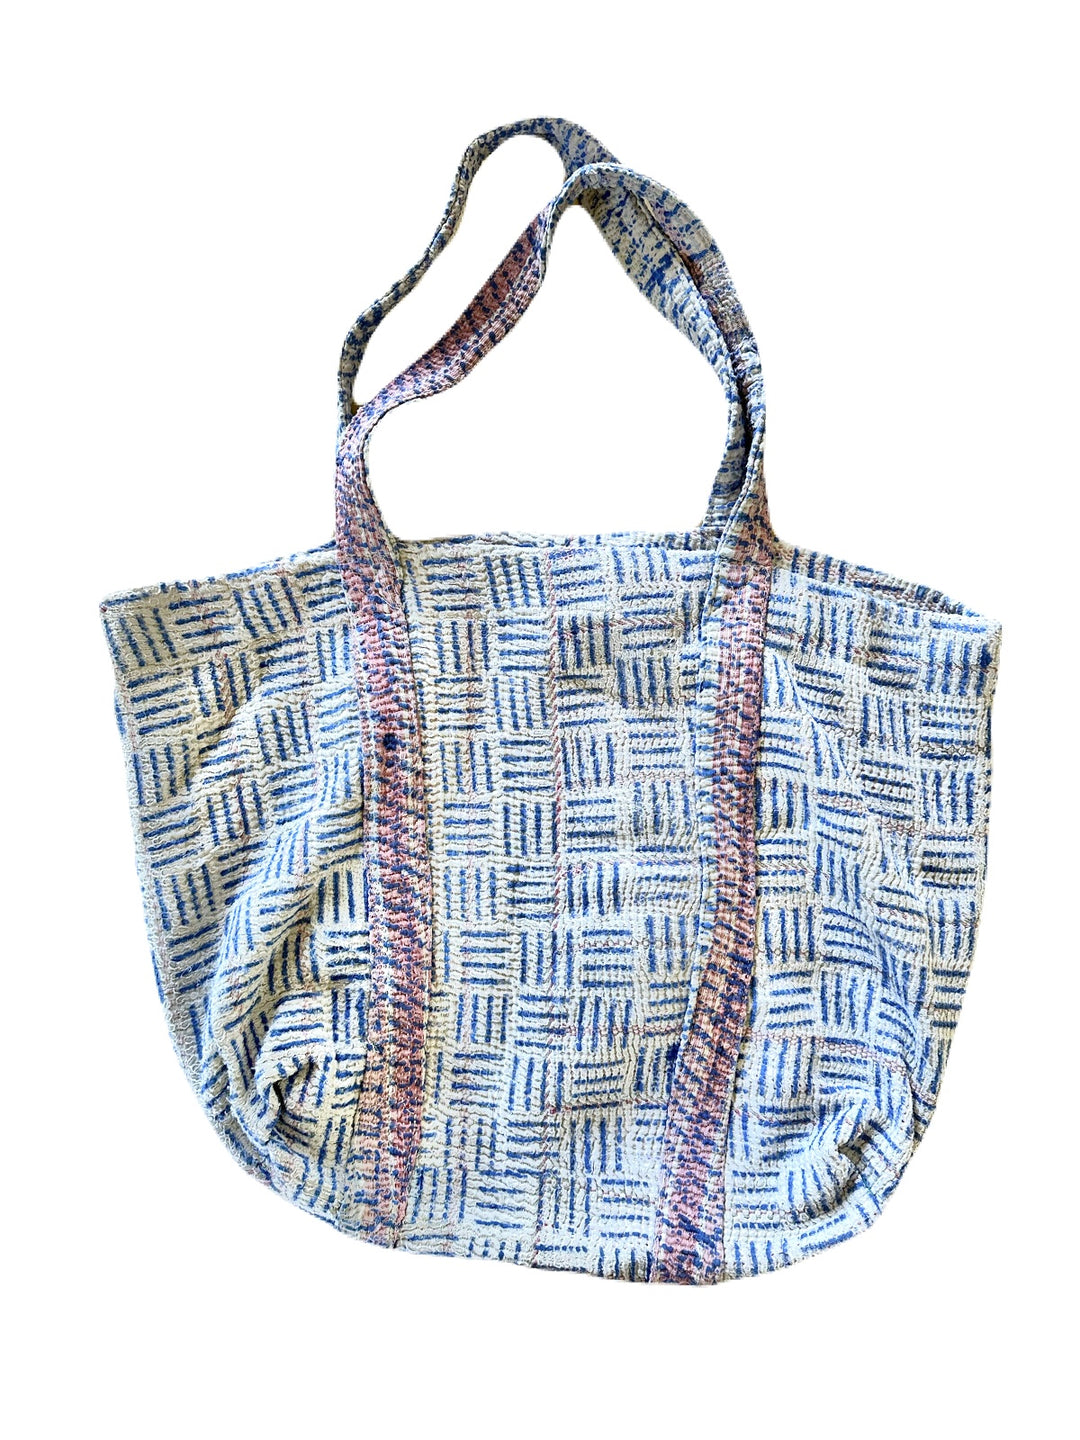 Special Edition White Kantha Totes